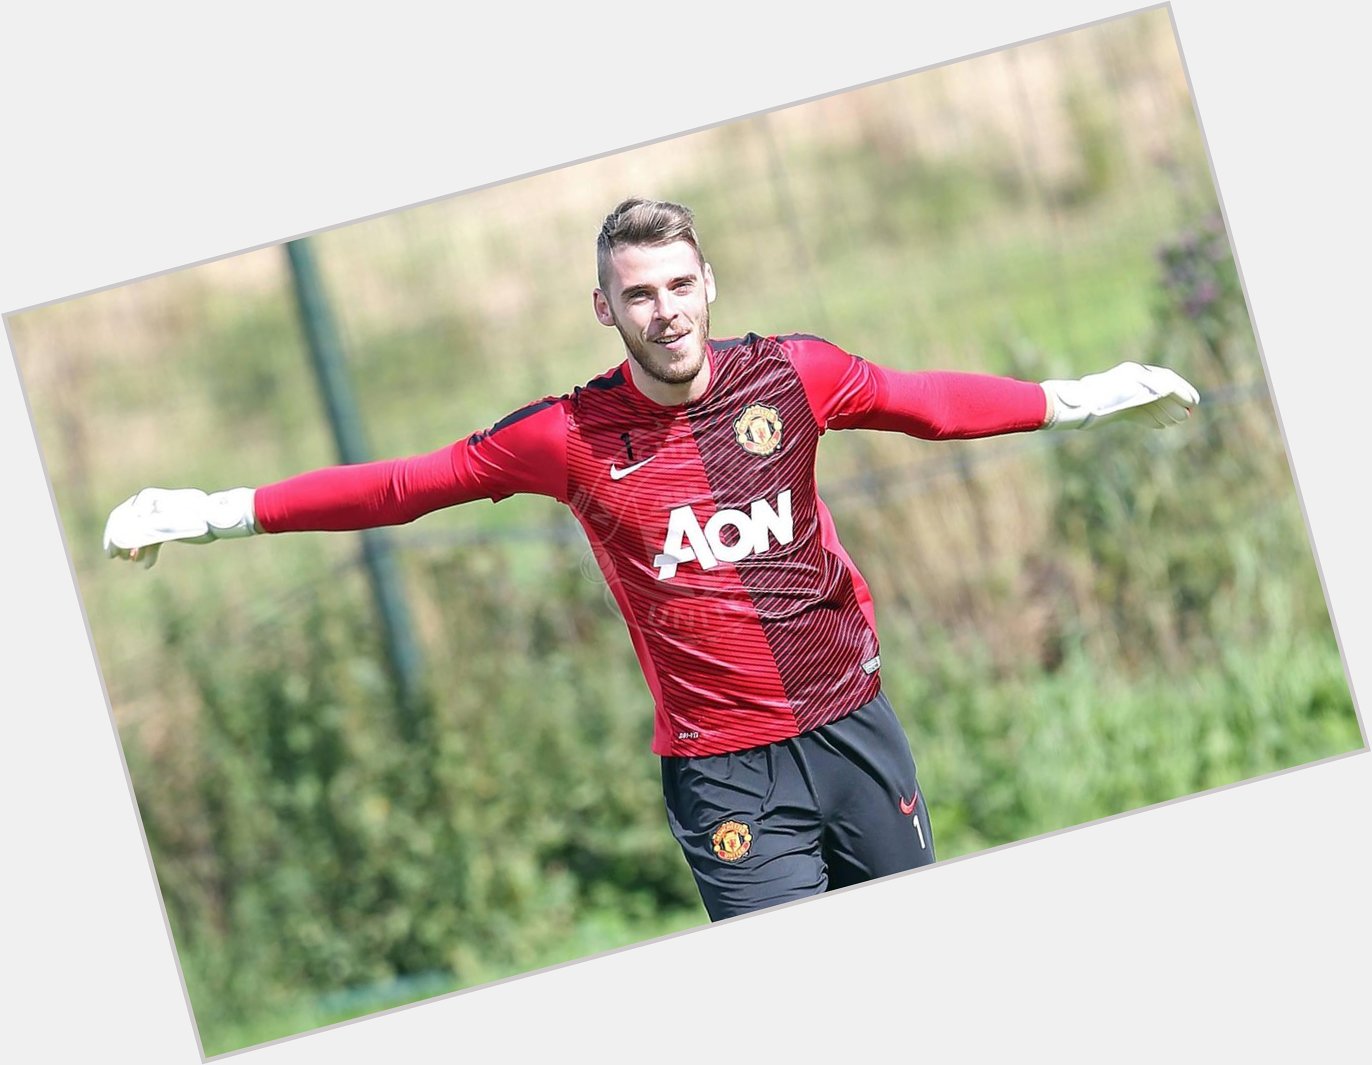 Happy birthday, David De Gea! Best wishes and keep the Red Flag flying high! <3 